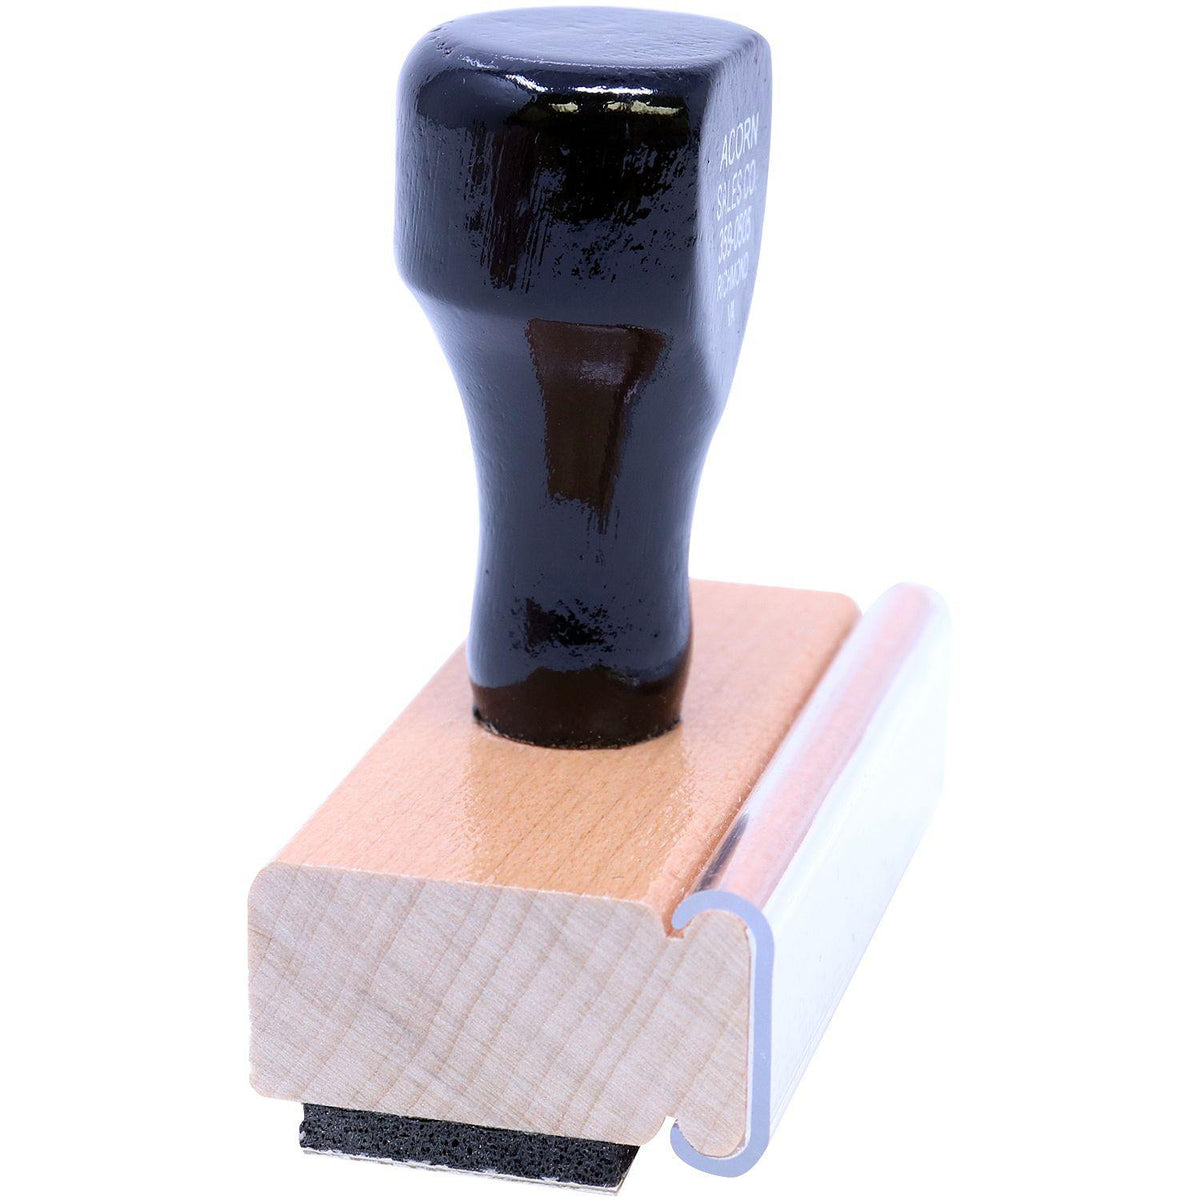 Side View of Via Aerea Rubber Stamp at an Angle